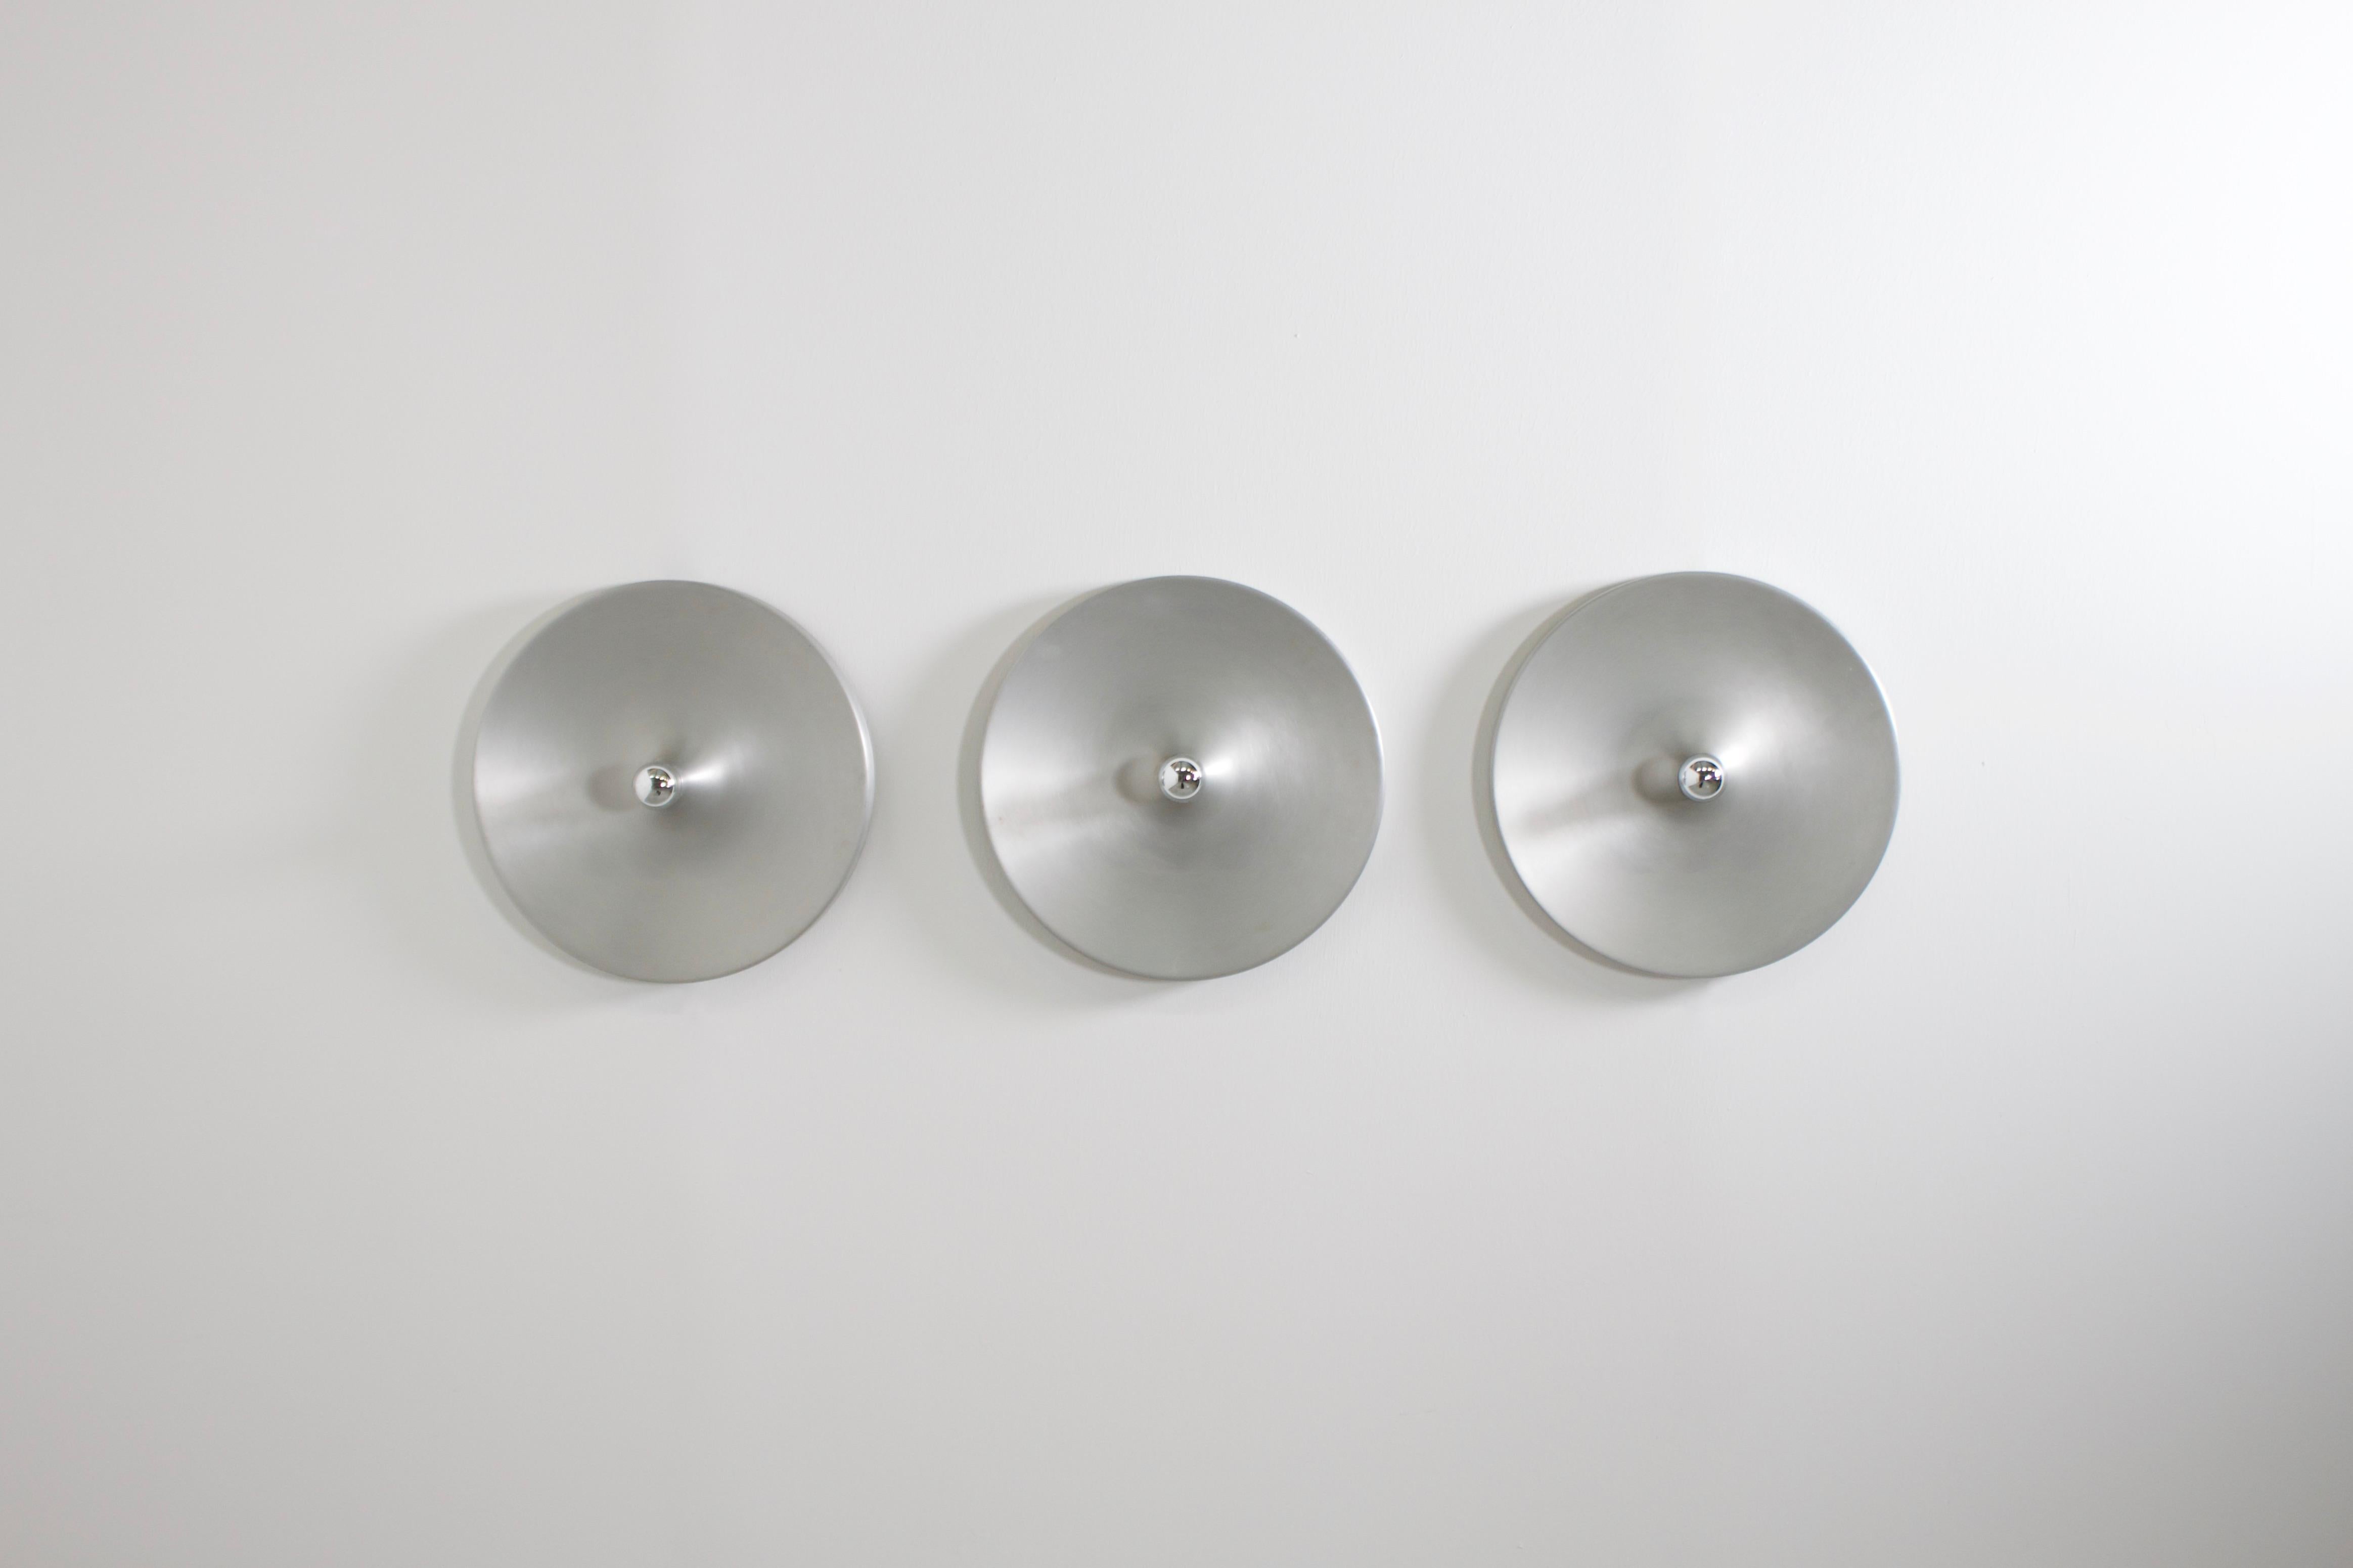 Aluminum sconces in very good condition.

6 lamps available

These lamps were used by Charlotte Perriand to decorate the apartments of Les Arcs Ski Resort in France 

They are made of aluminum and when used with a mirrored light bulb they generate a